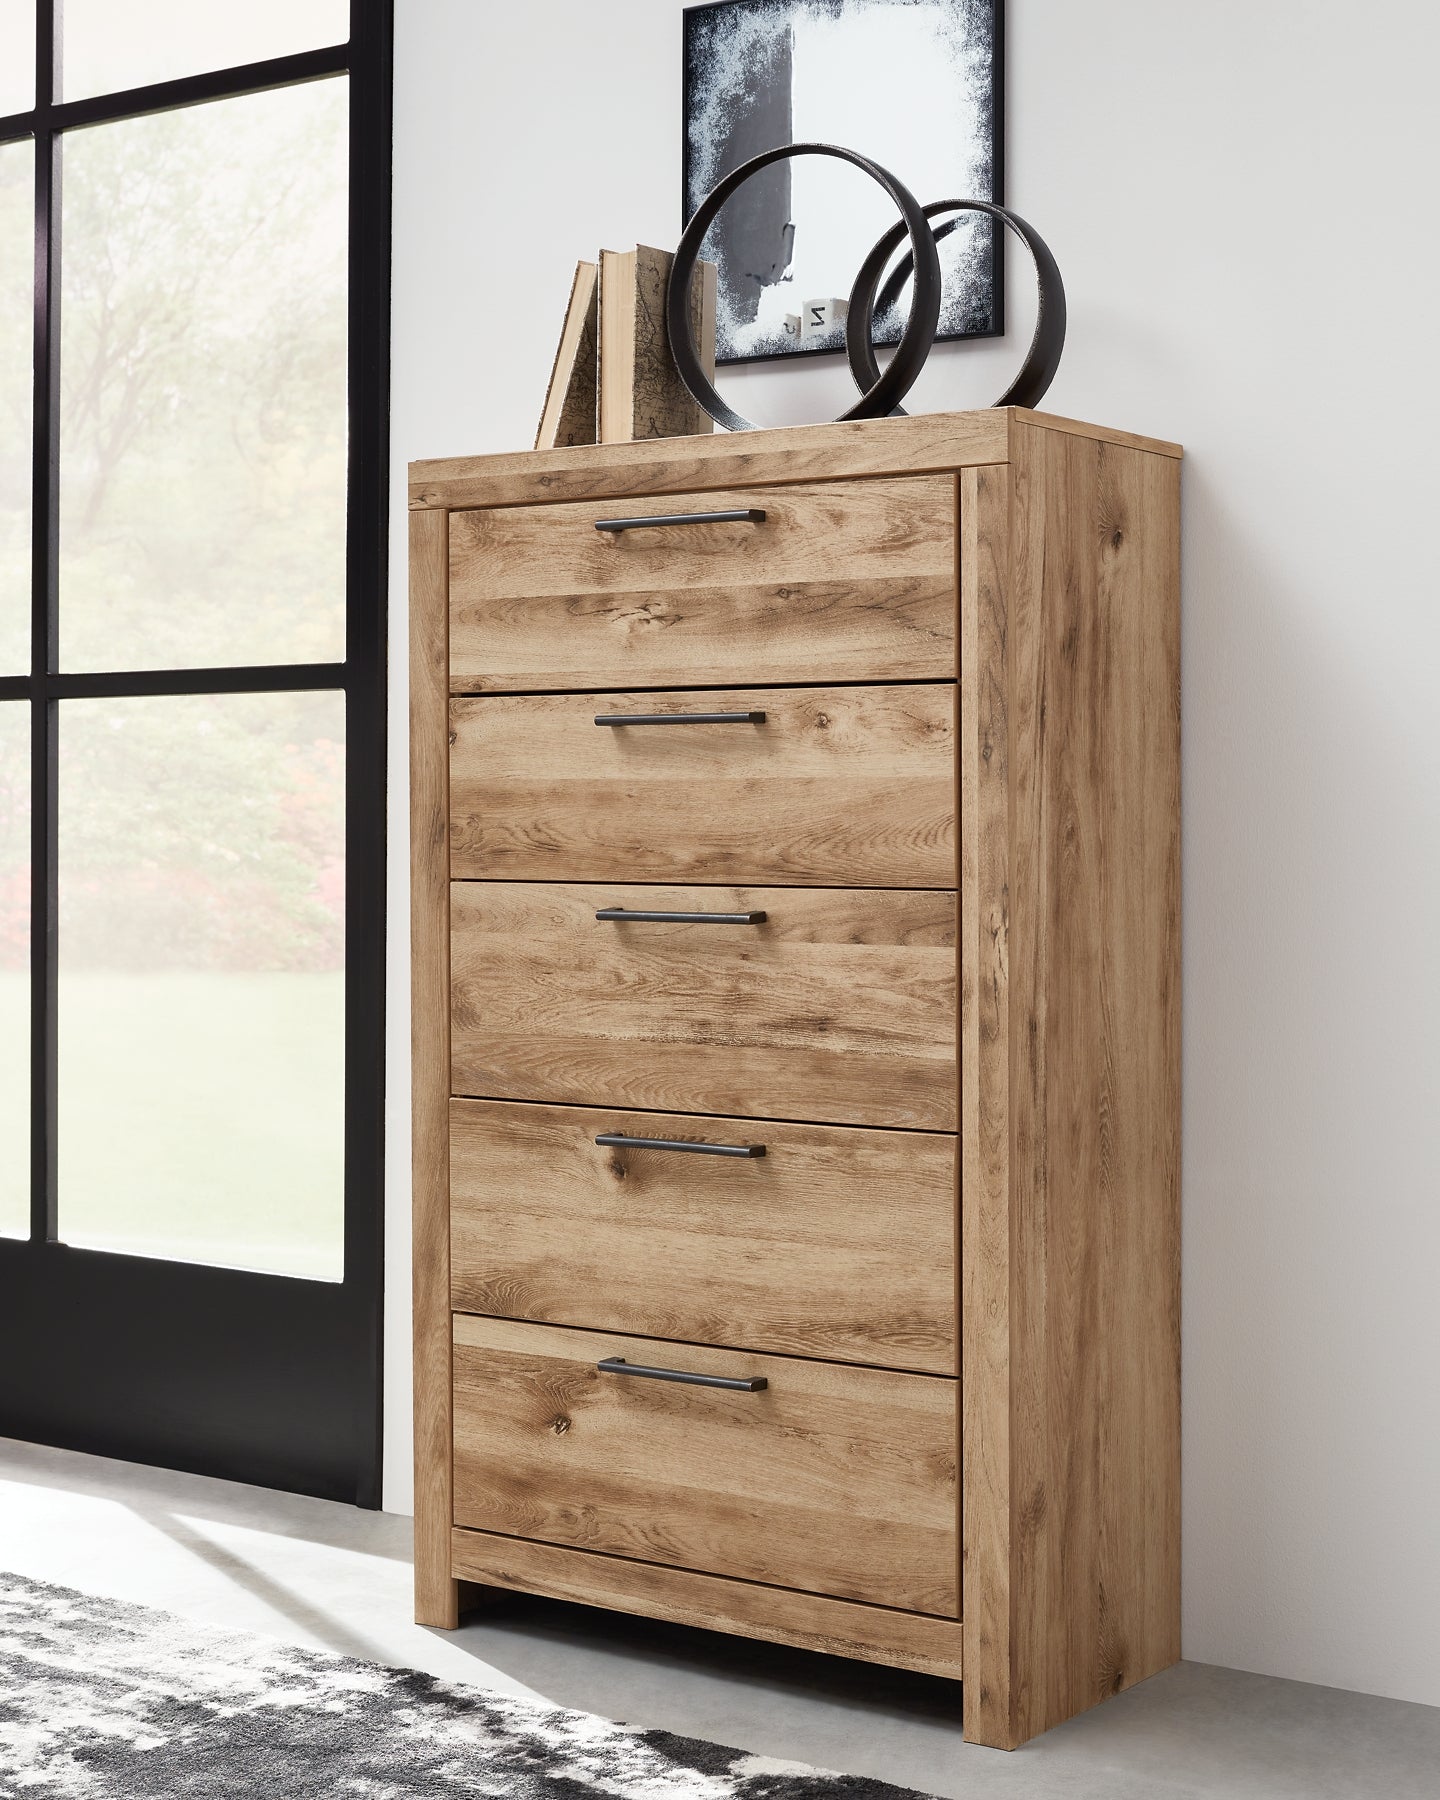 Hyanna  Panel Headboard With Mirrored Dresser And Chest